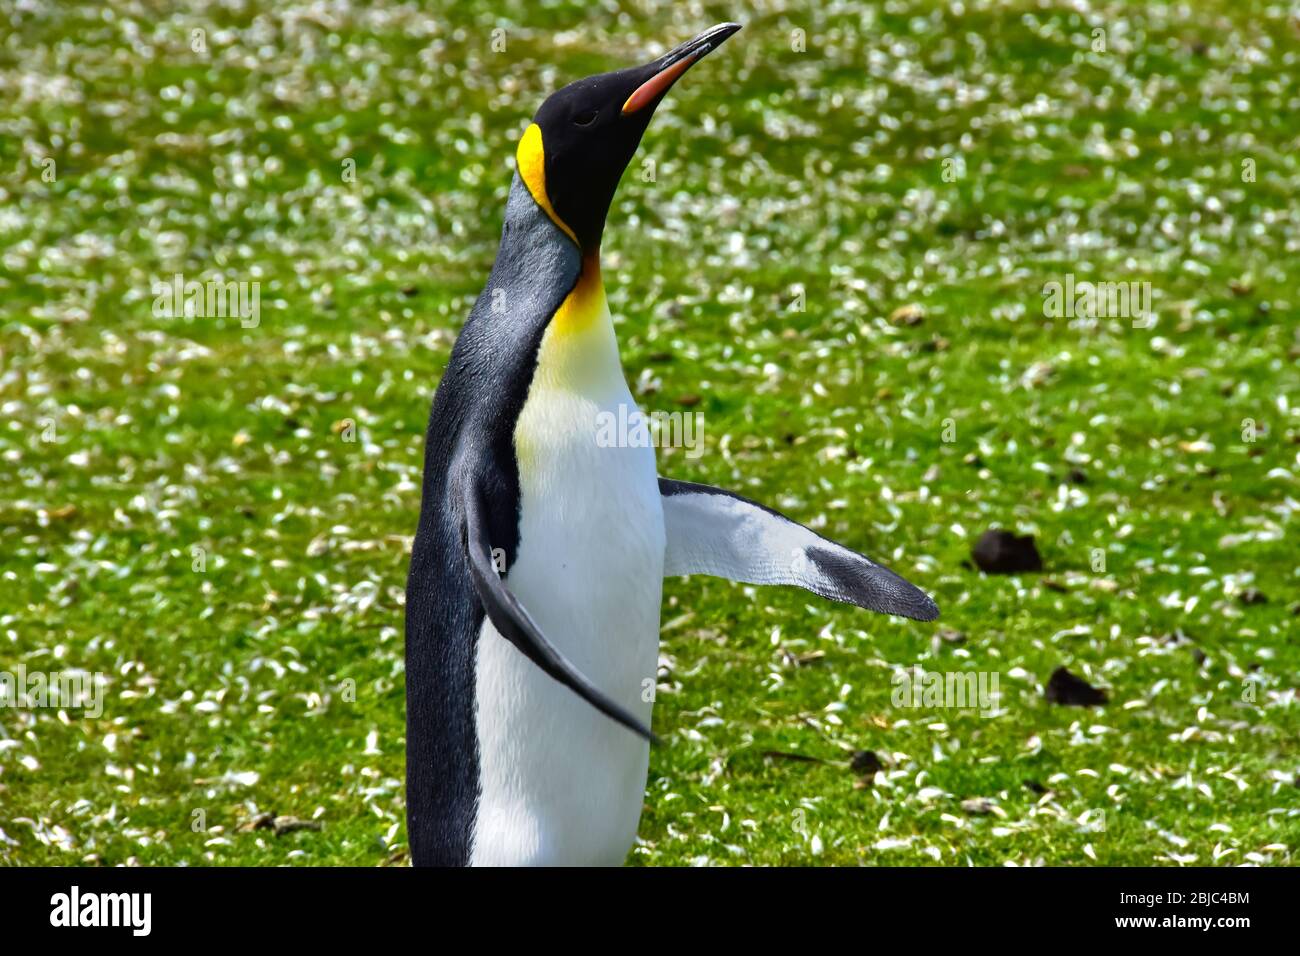 King Penguin out walking at Volunteer Point, Falkland Islands. Stock Photo